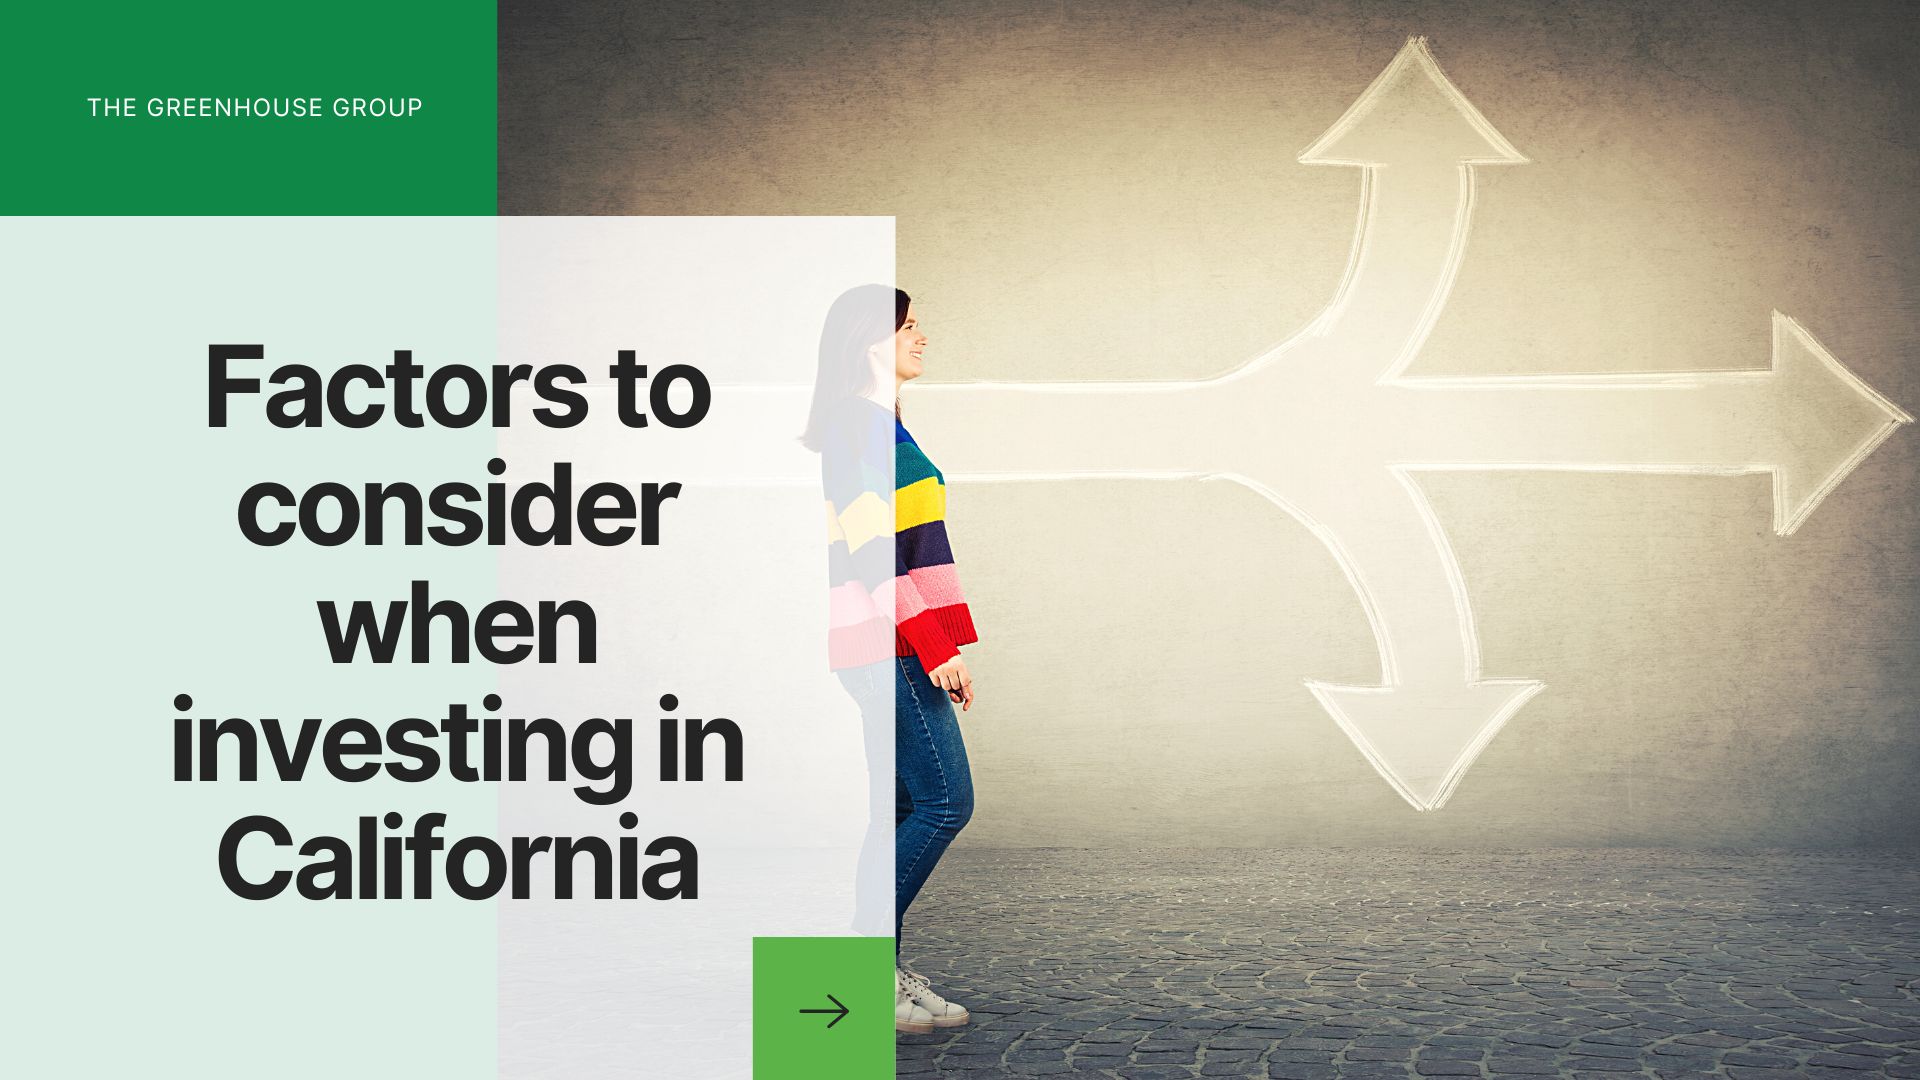 Factors to consider when investing in California